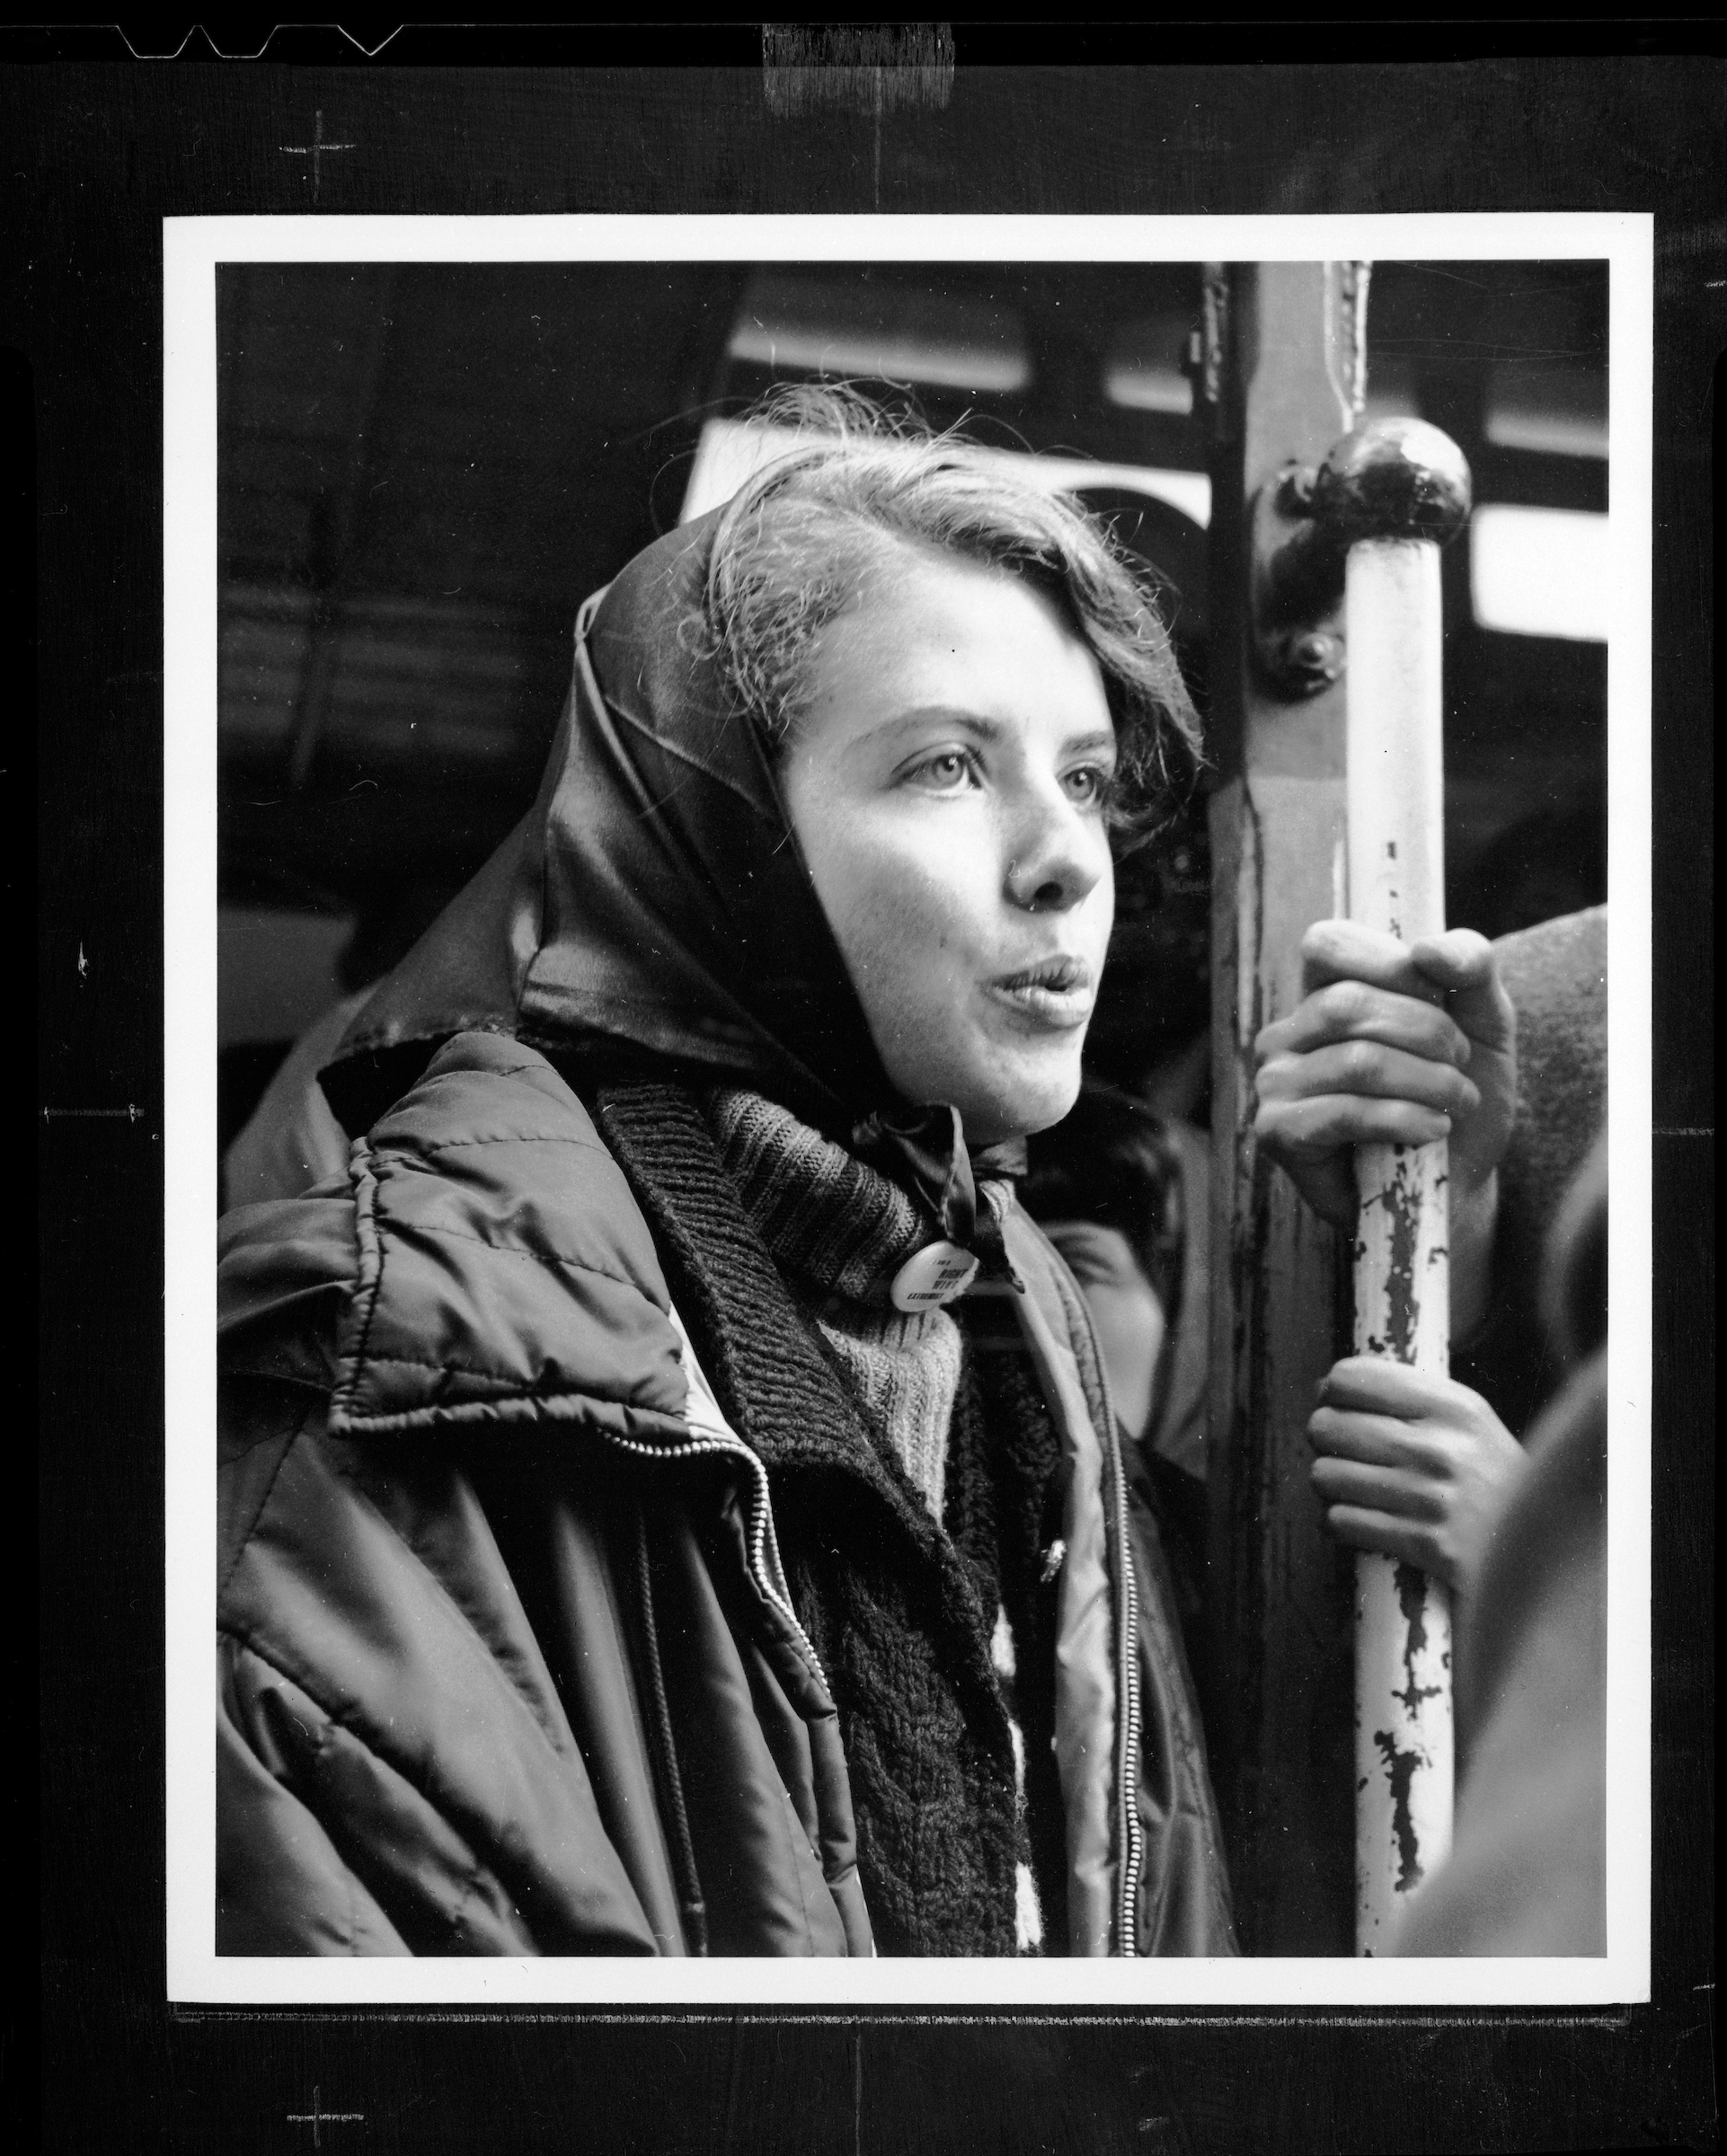 A black and white photo of a woman holding on to a San Francisco cable car.